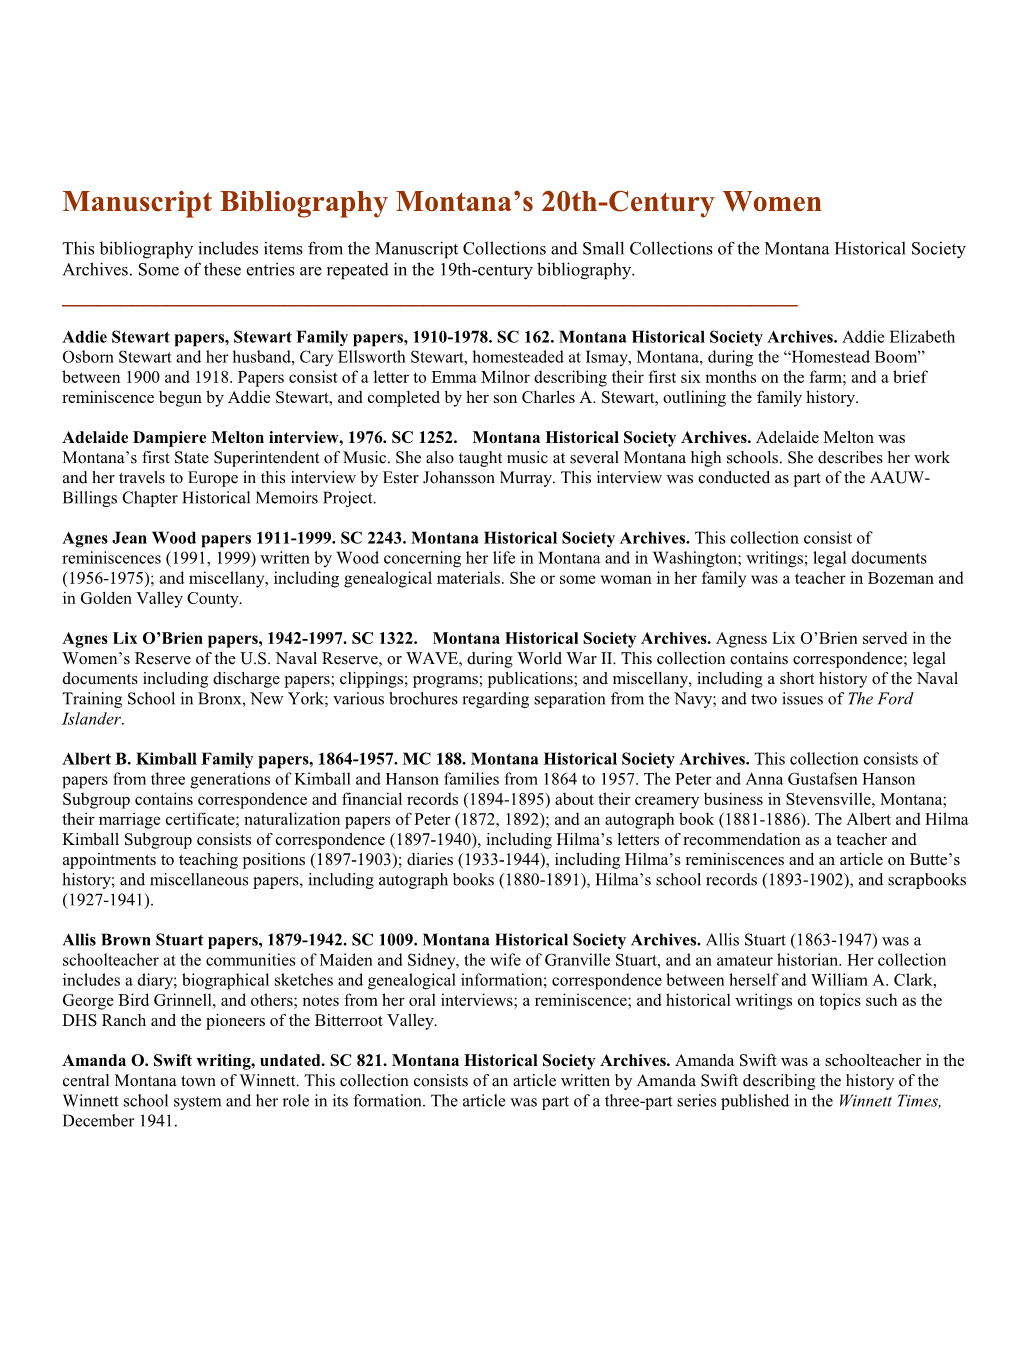 Bibliography of Unpublished Manuscripts